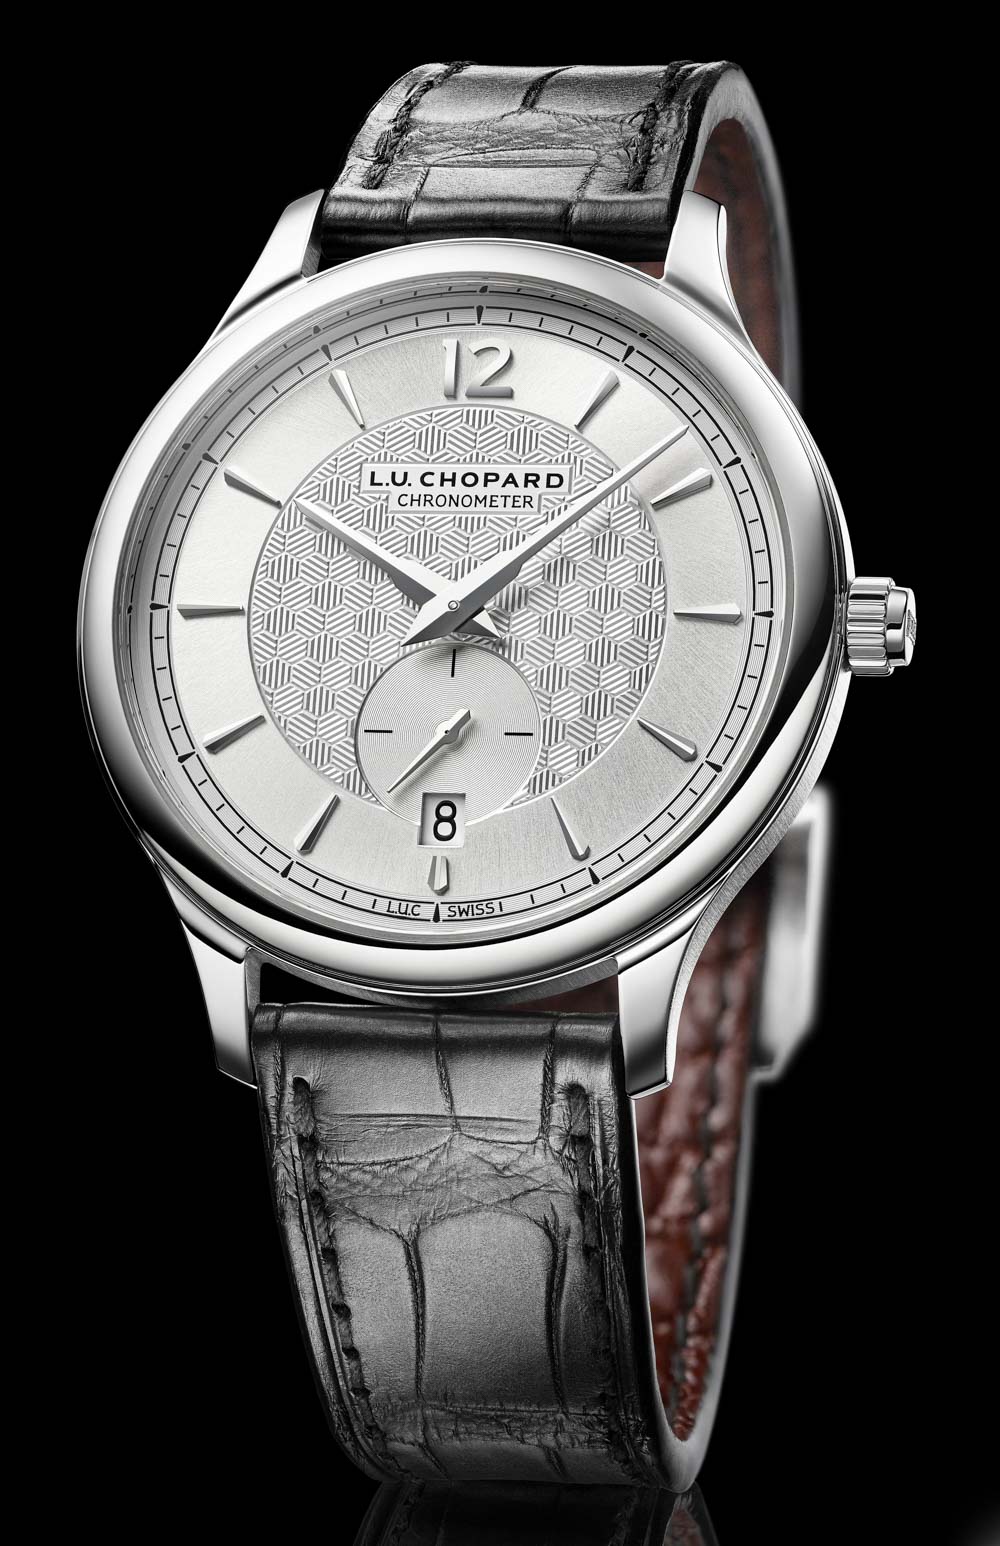 Hands-On Review - Chopard L.U.C XPS 1860 in stainless steel - High-end made  accessible - Monochrome Watches